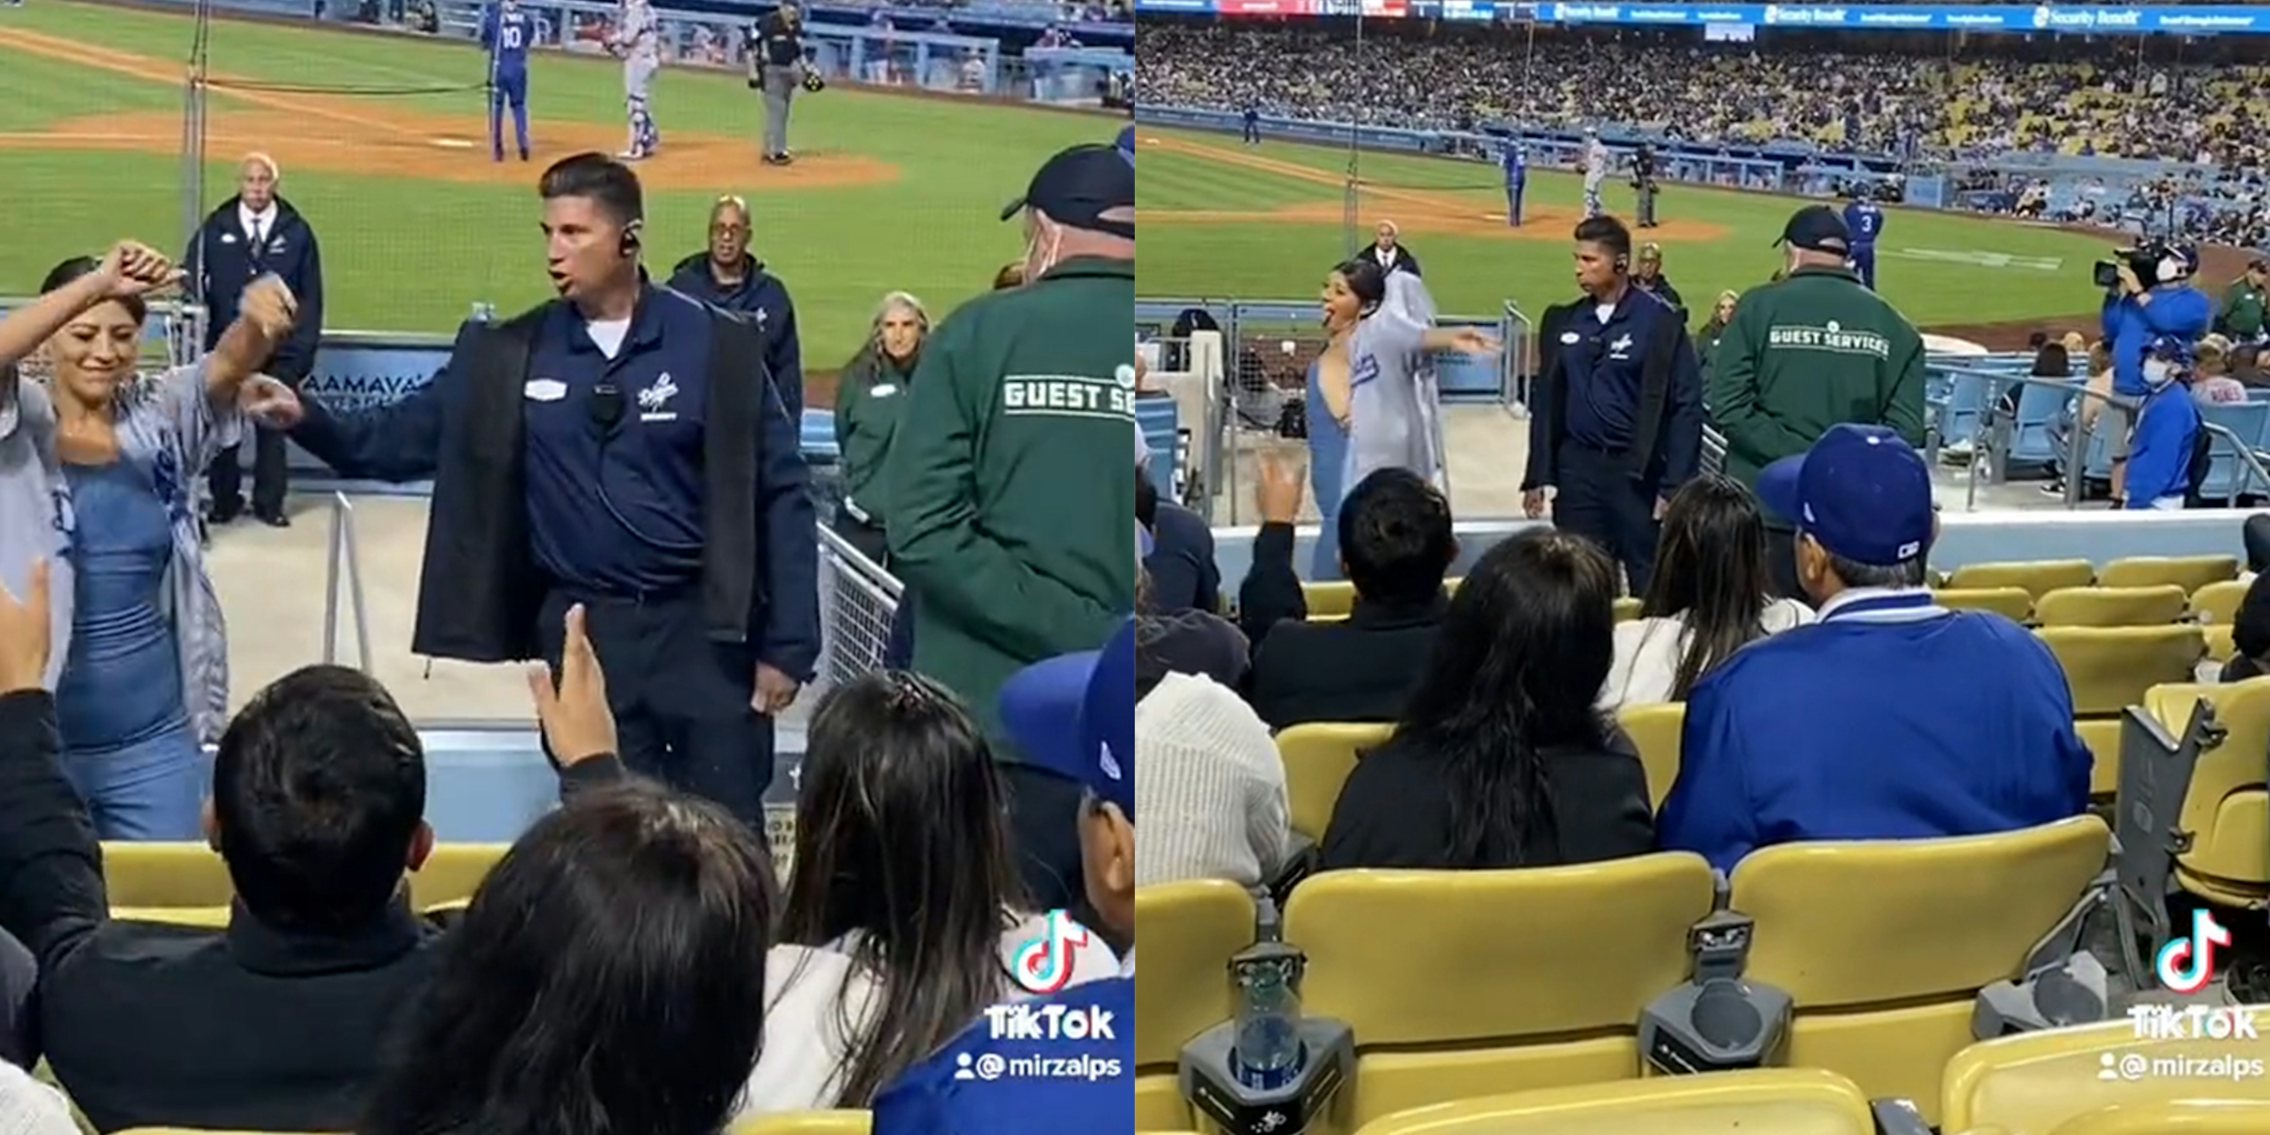 Woman Escorted Out Of Baseball Game For Accidental Nip Slip